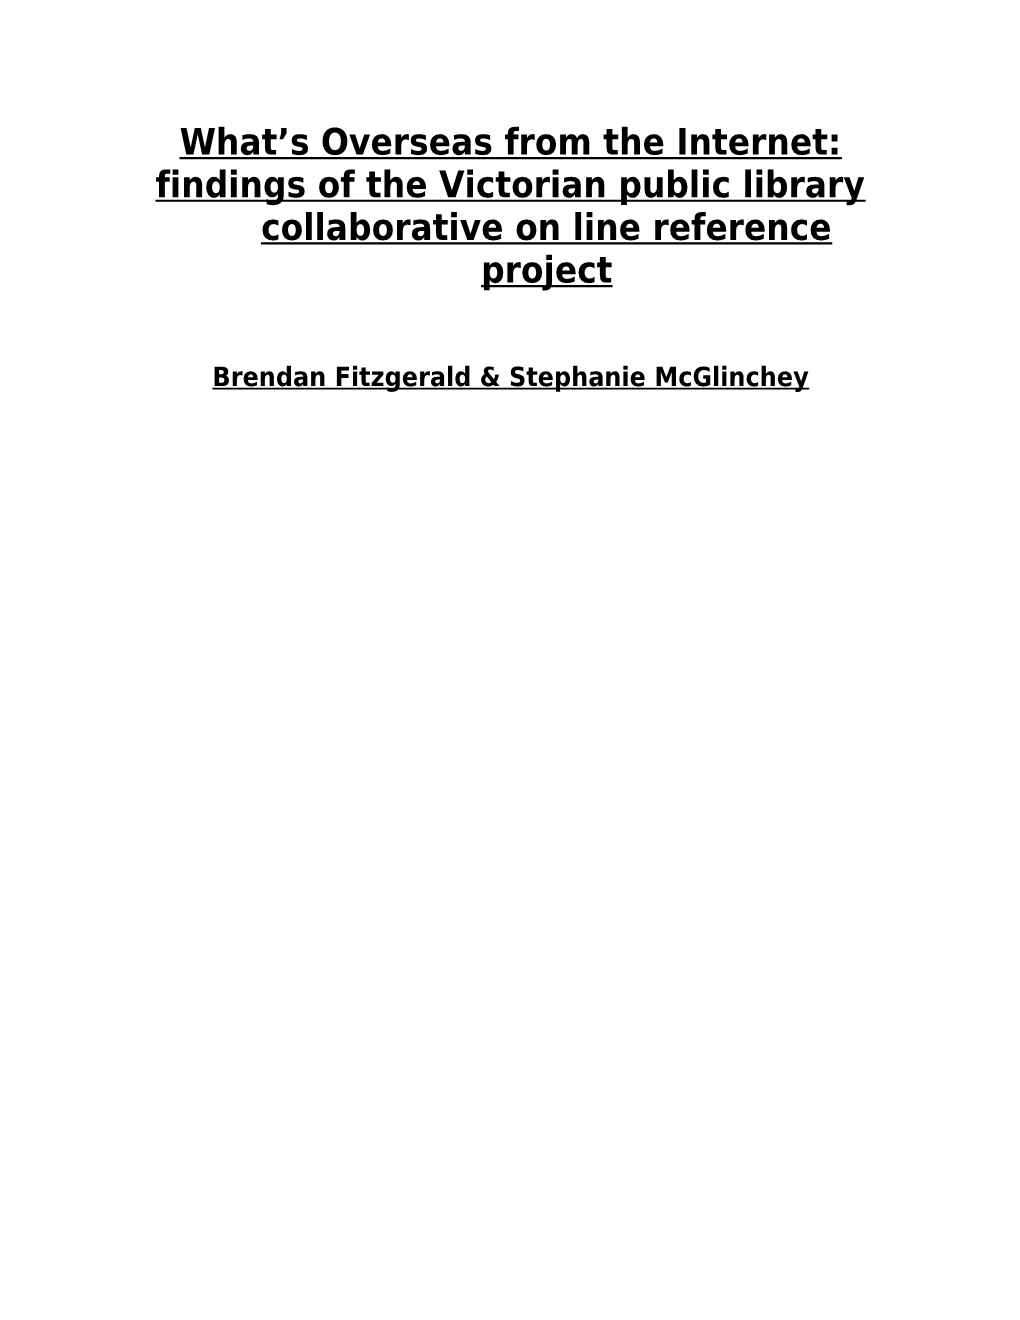 What S Overseas from the Internet: Findings of the Victorian Public Library Collaborative